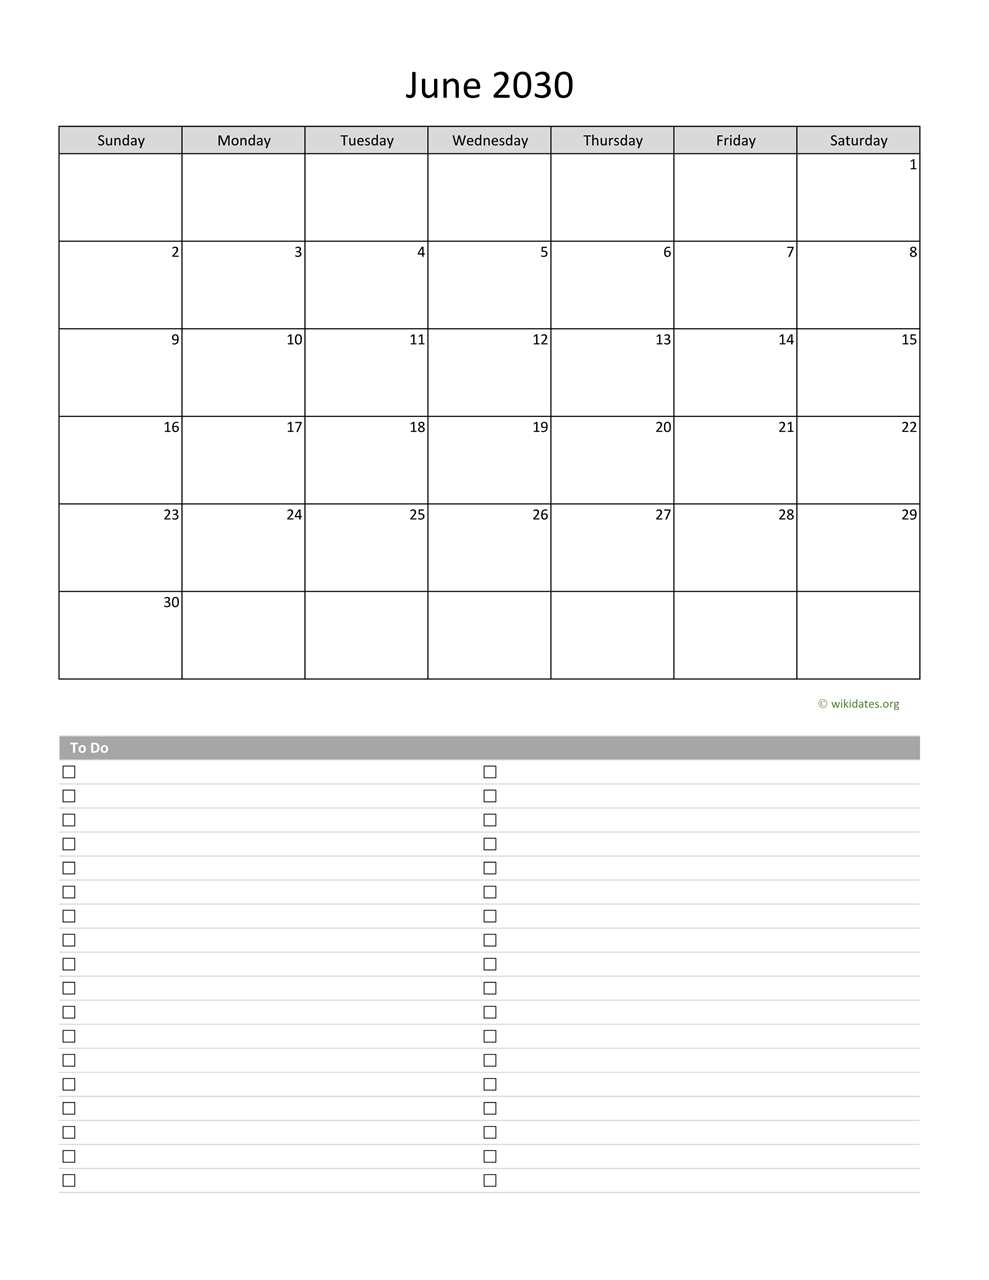 June 2030 Calendar with To-Do List | WikiDates.org